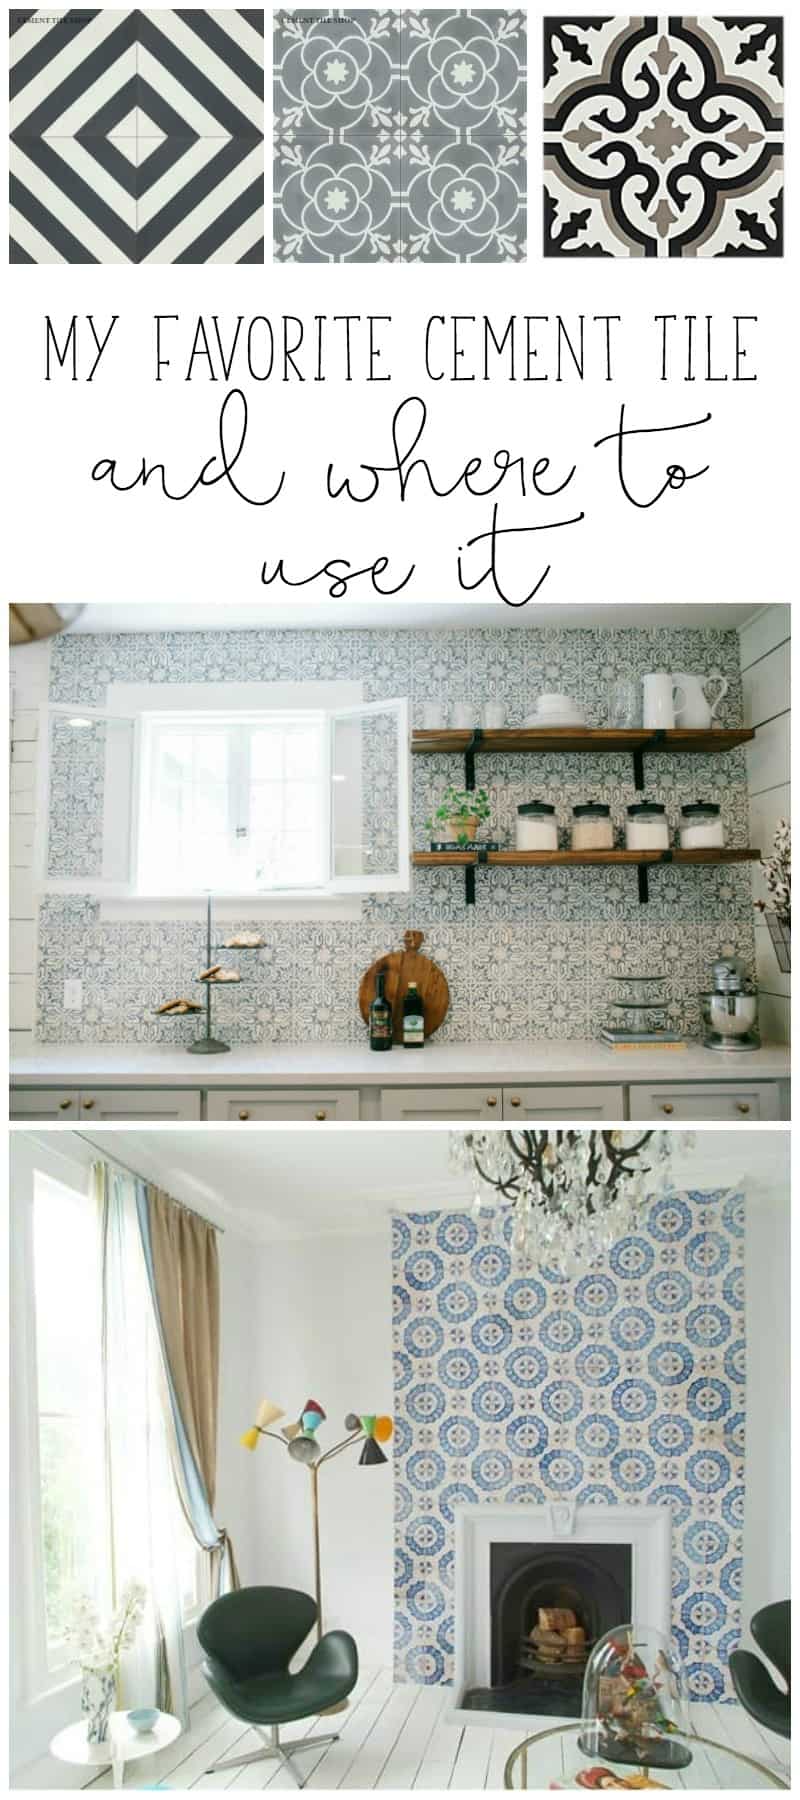 My favorite cement tile and where to use it in your home.  Find inspiration for cement tile in bathrooms, kitchens and fireplaces plus tons of cement tile stores and pics